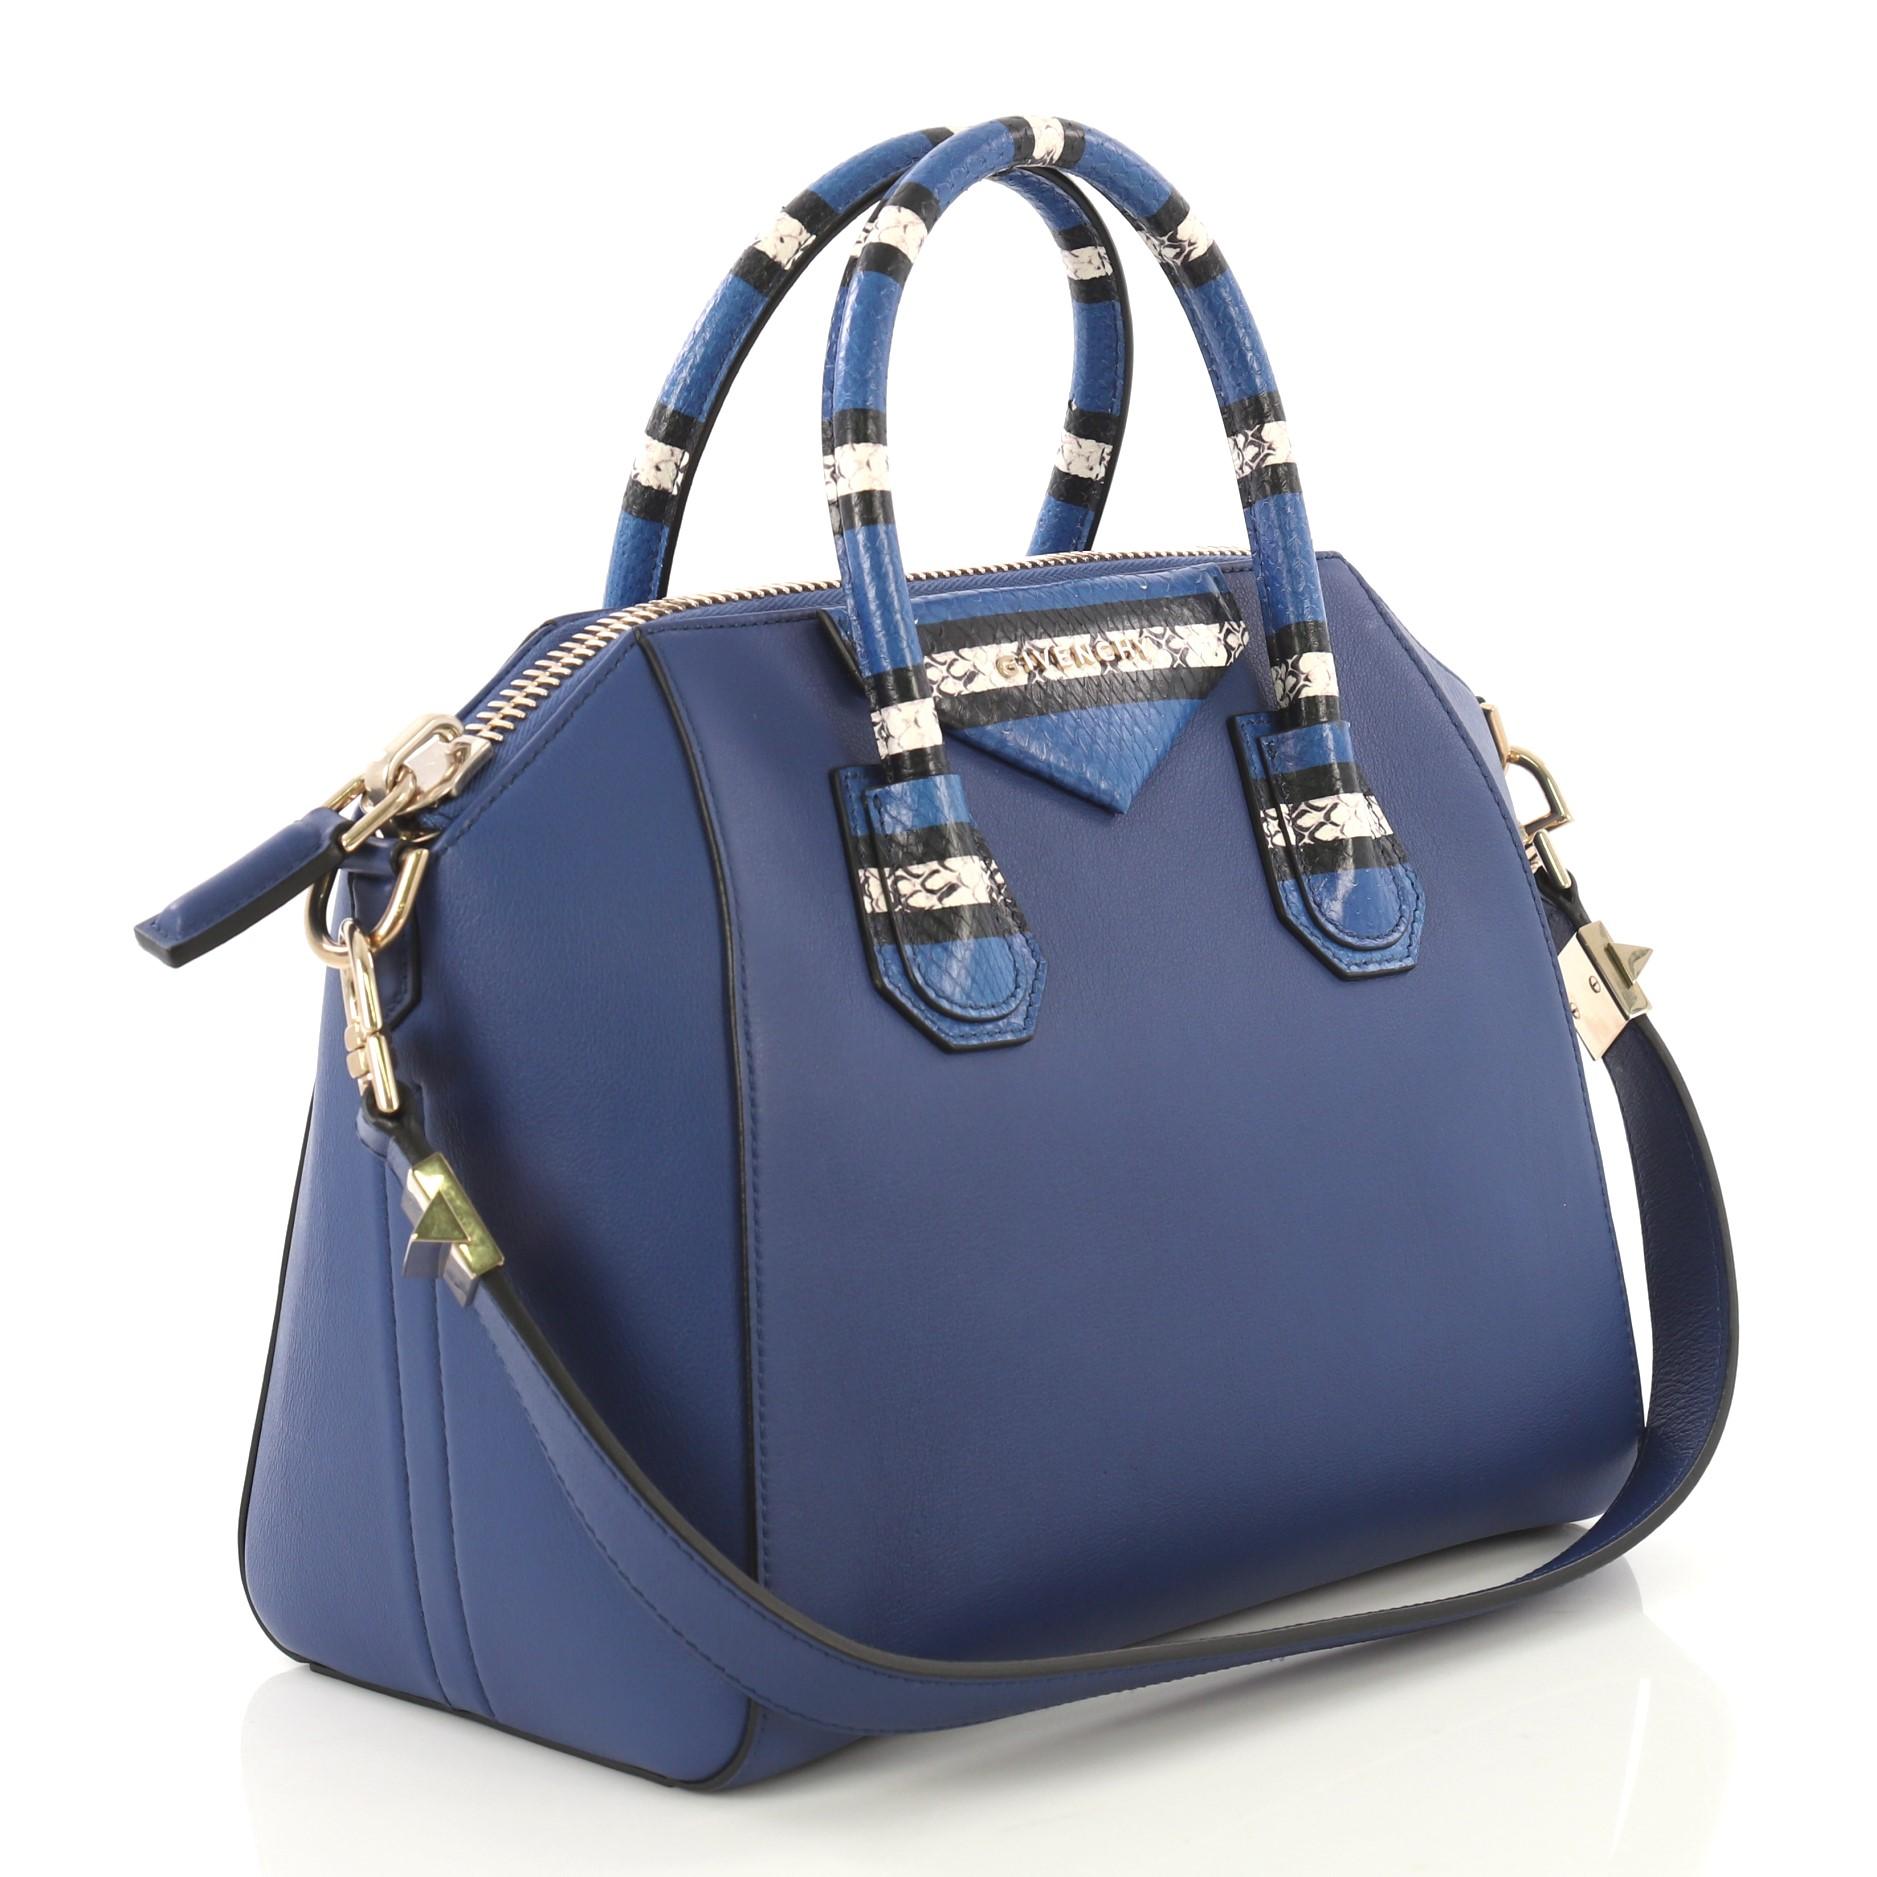 This Givenchy Antigona Bag Leather with Snakeskin Detail Small, crafted from blue leather with snakeskin detail, features dual rolled genuine snakeskin handles and gold-tone hardware. Its zip closure opens to a black fabric interior with zip and